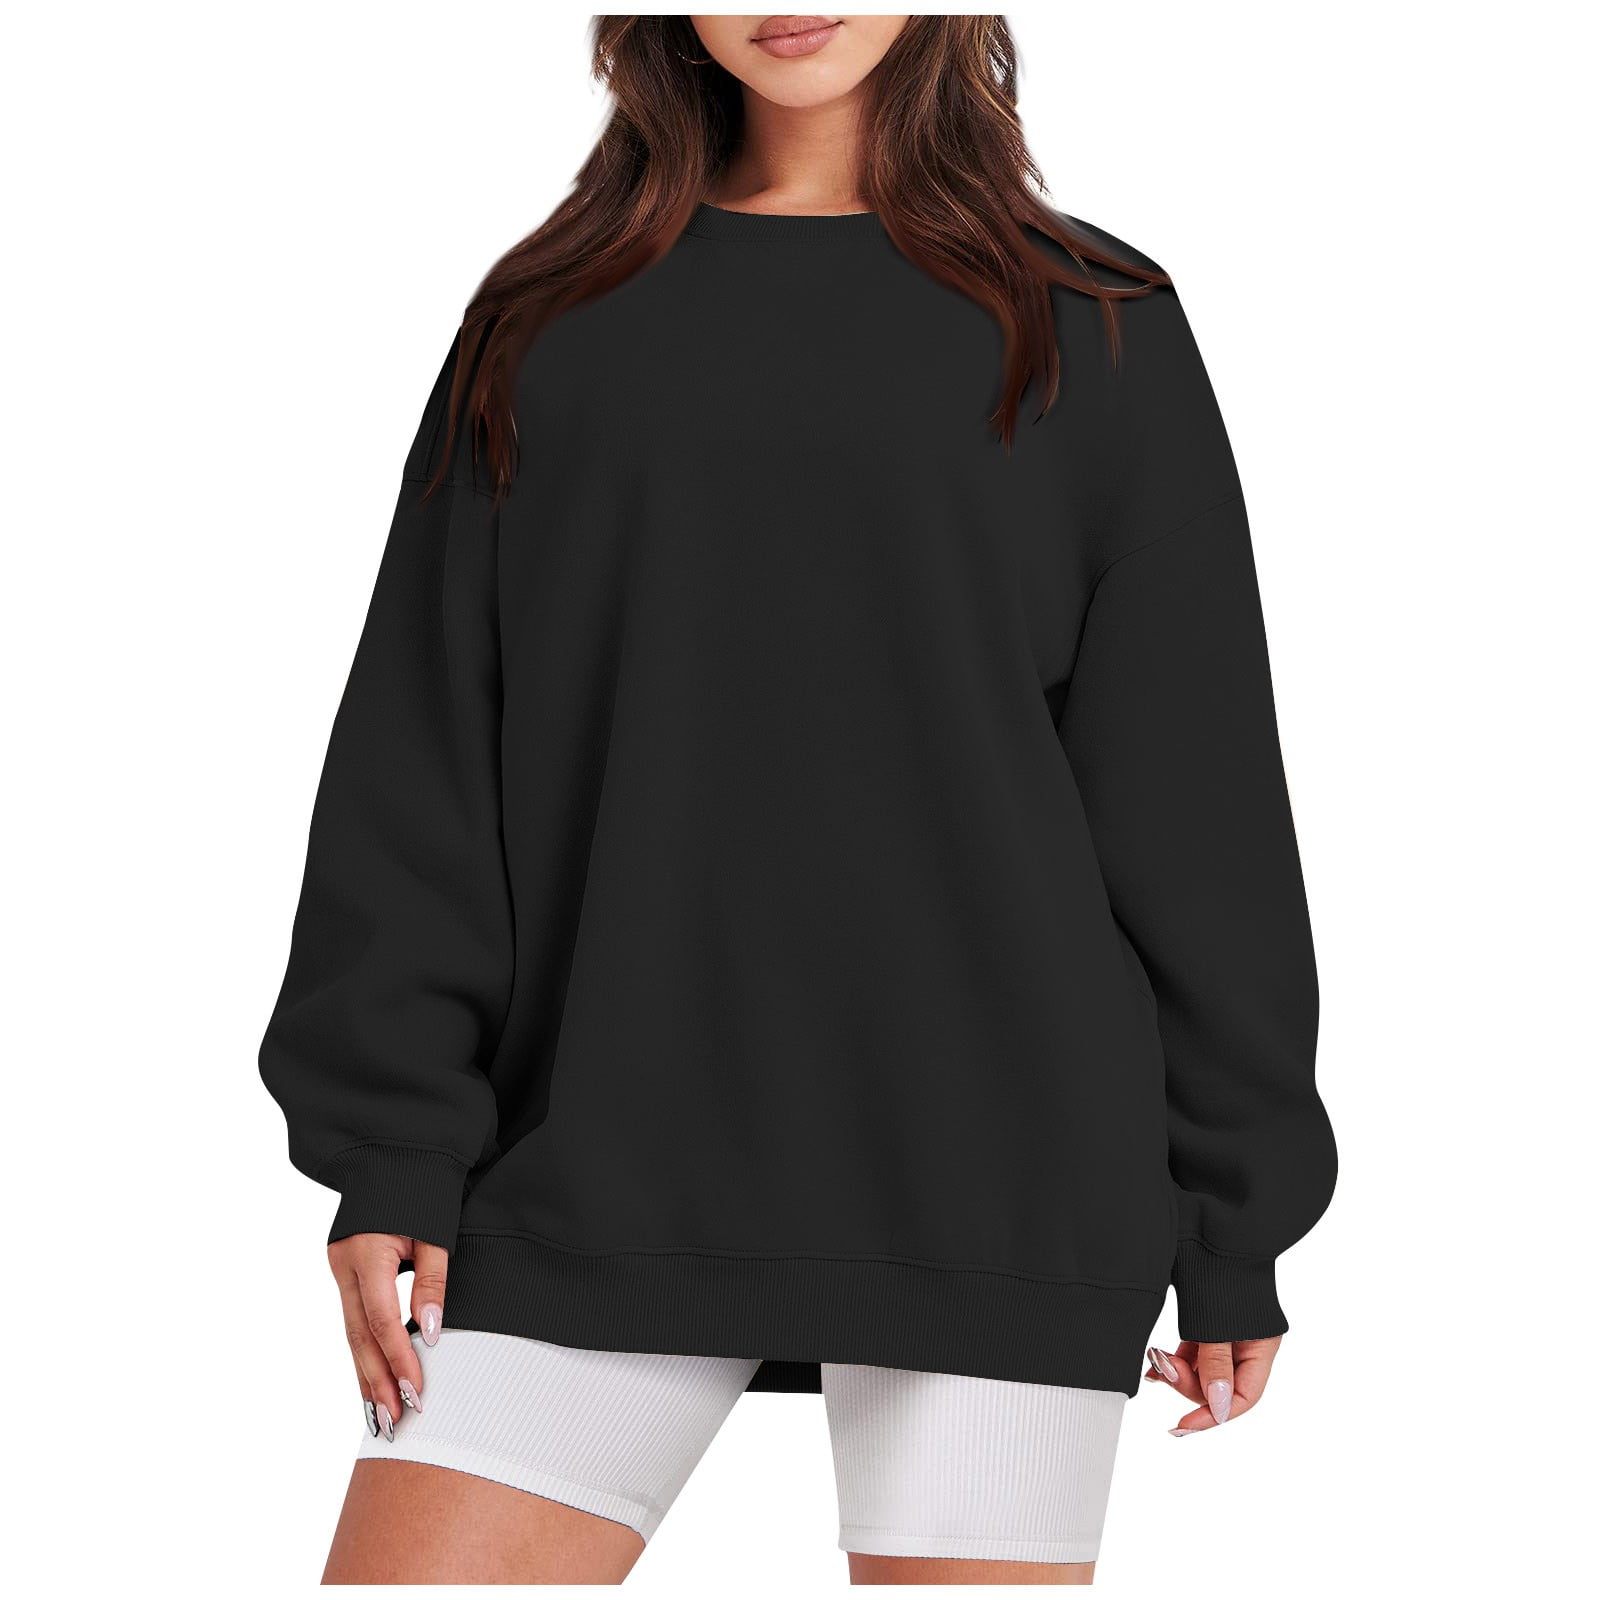 eguiwyn Zip up Hoodies for Women Color Crew Neck Loose outlets overstock 99  cents items women plus size shirts t shirts bulk wholesale black zip up  hoodie prime deals today at